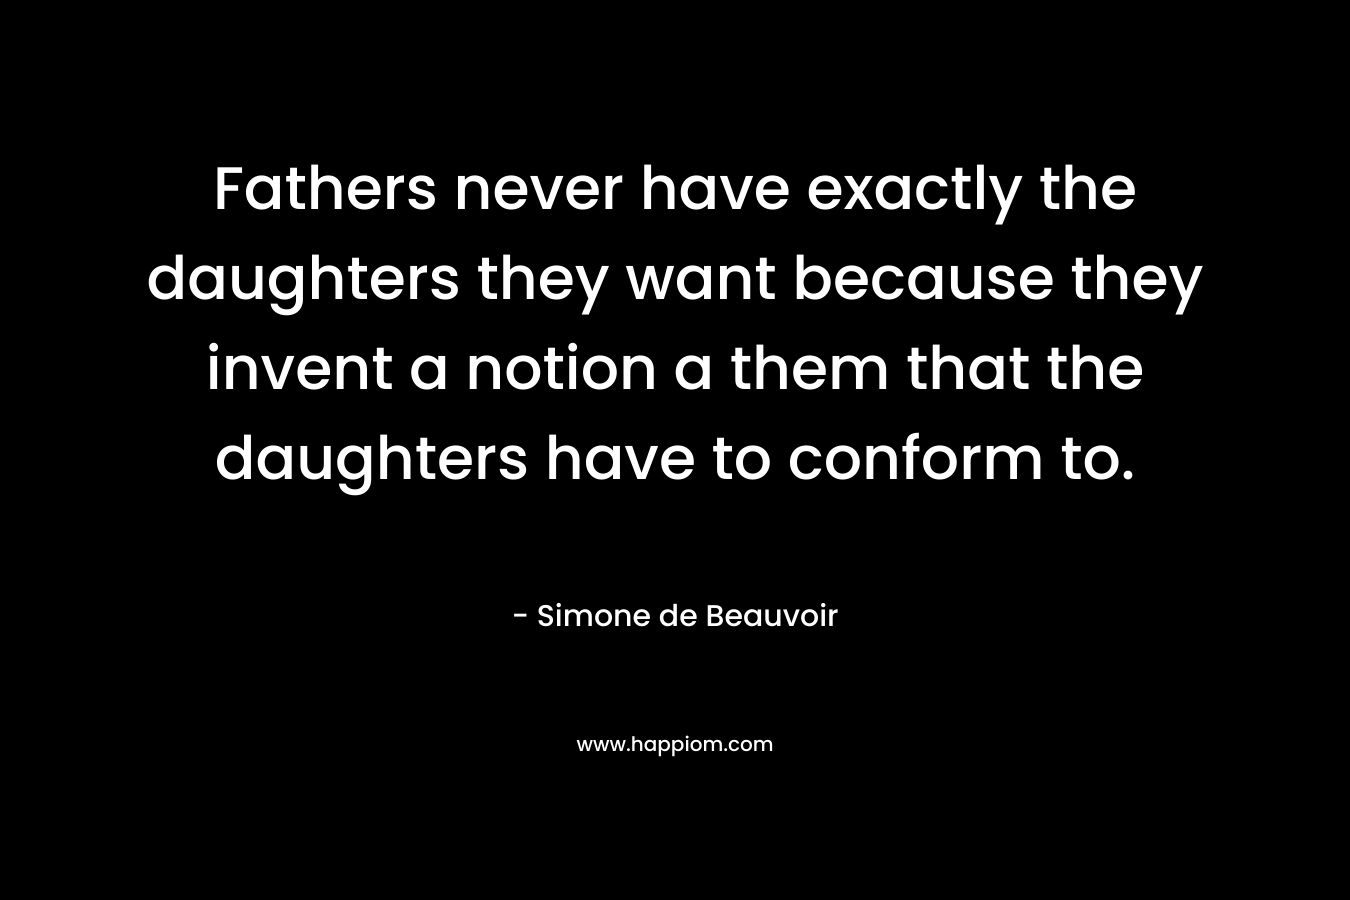 Fathers never have exactly the daughters they want because they invent a notion a them that the daughters have to conform to. – Simone de Beauvoir